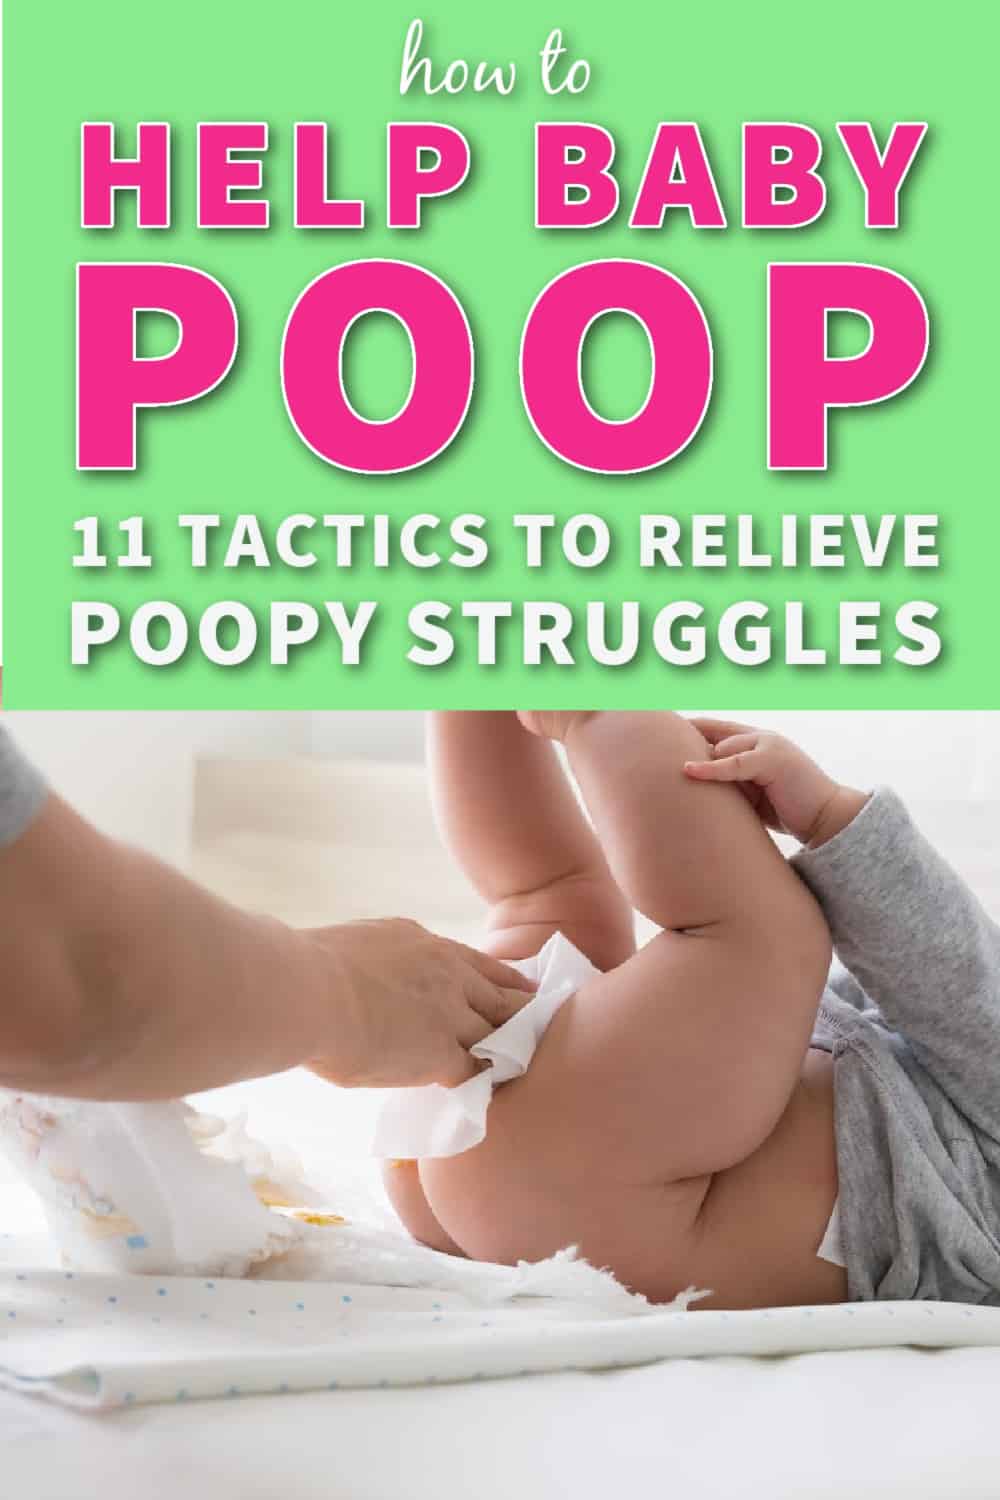 HOW TO HELP A NEWBORN POOP INSTANTLY FEATURE IMAGE